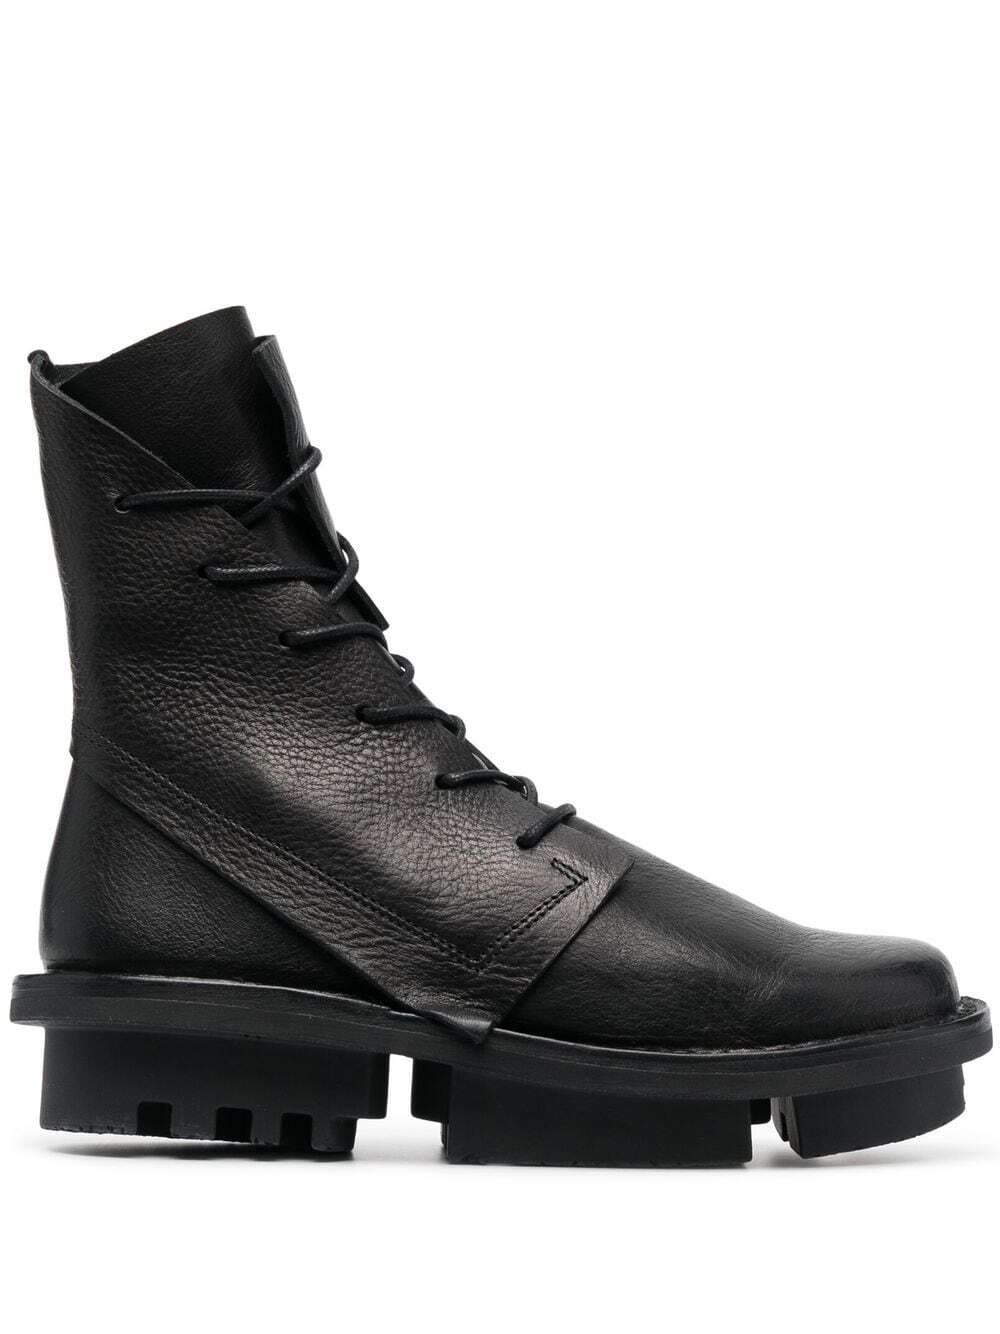 TRIPPEN Vacate asymmetric leather boots - Black